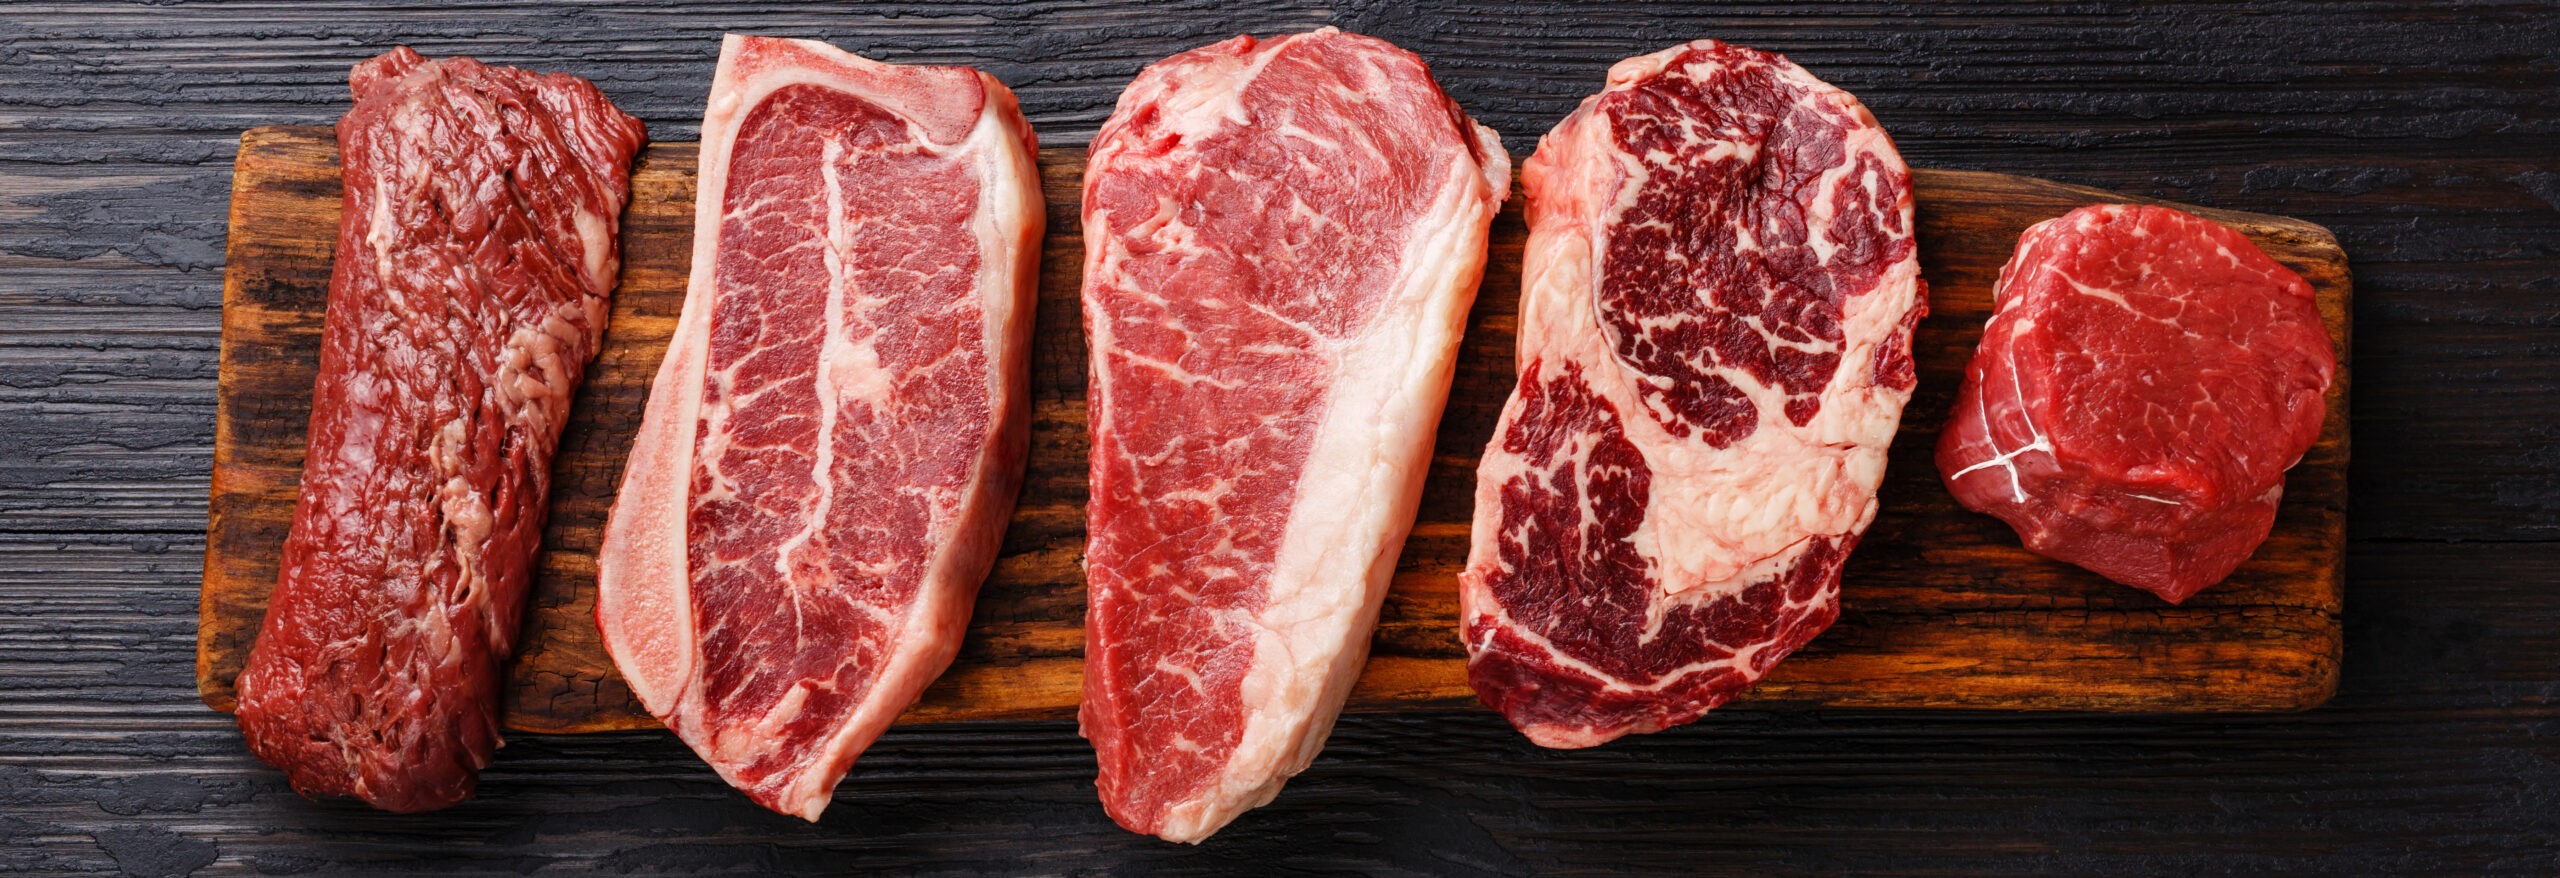 7 Health Benefits Of Red Meat